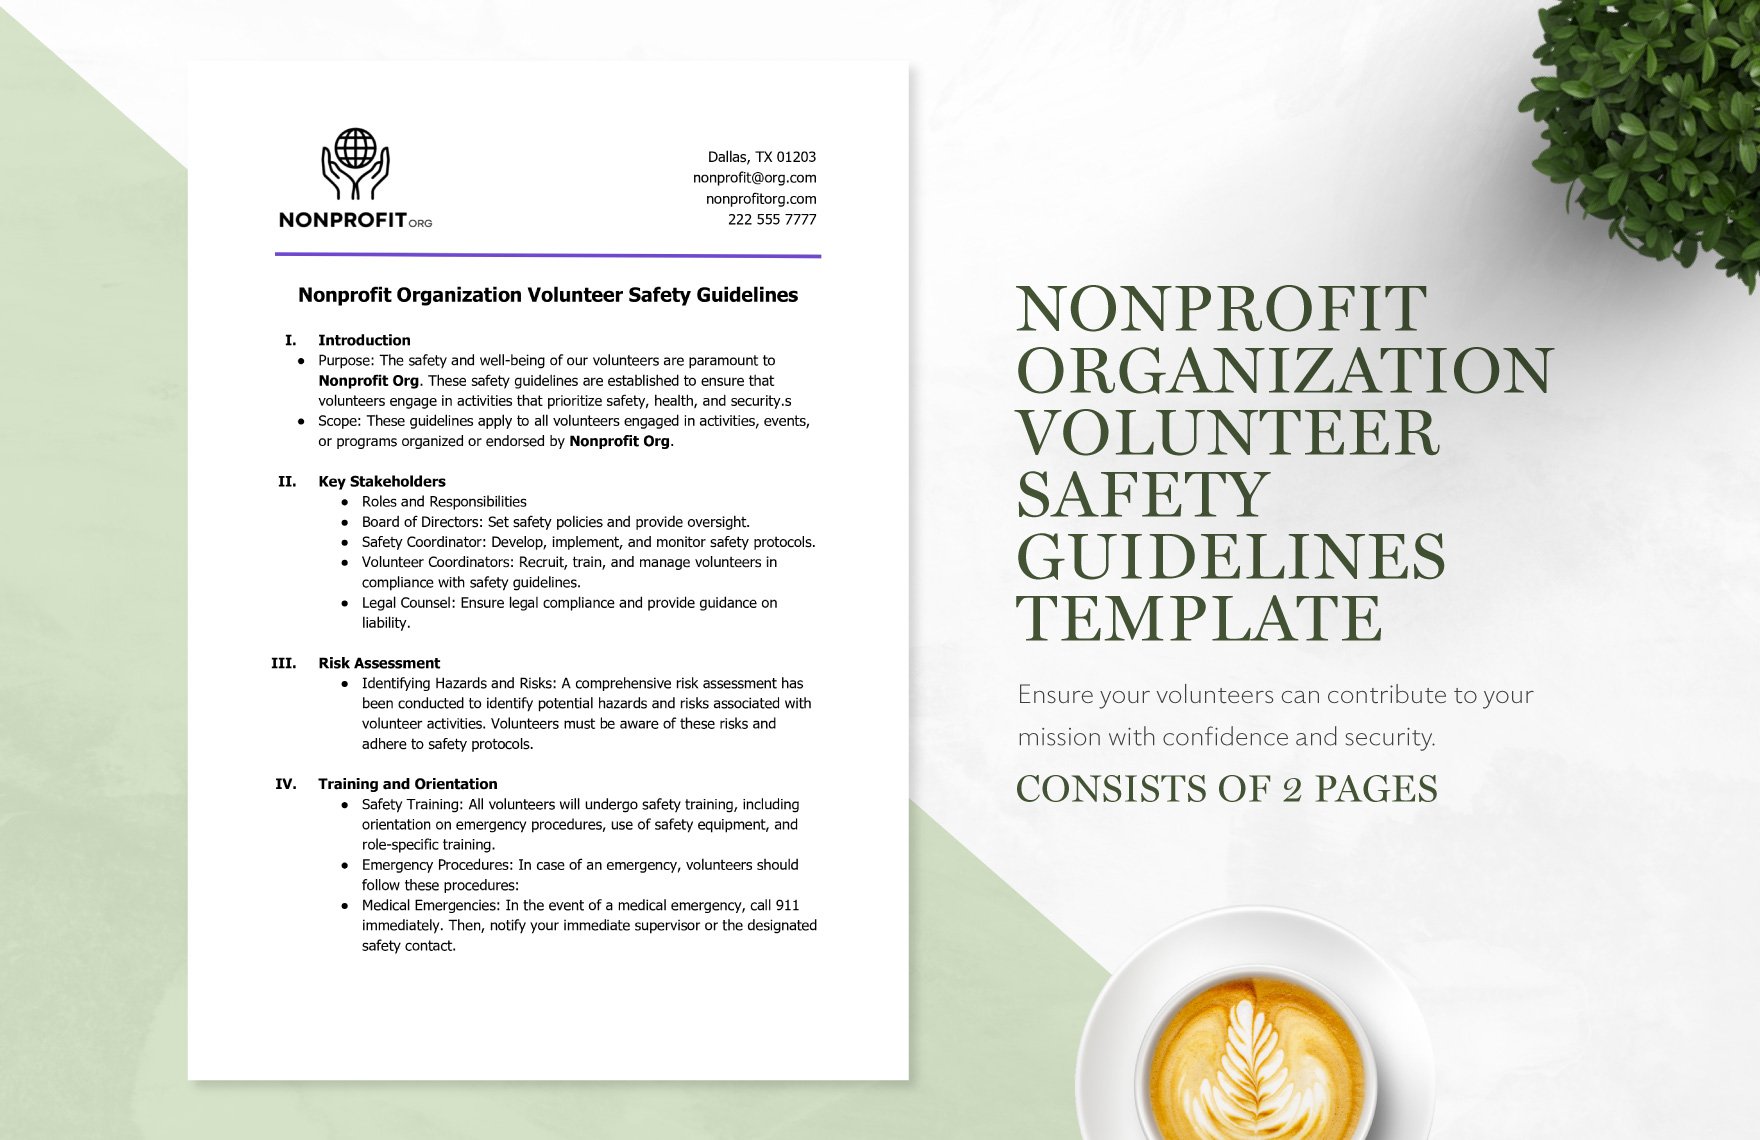 Nonprofit Organization Volunteer Safety Guidelines Template in Word, Google Docs, PDF